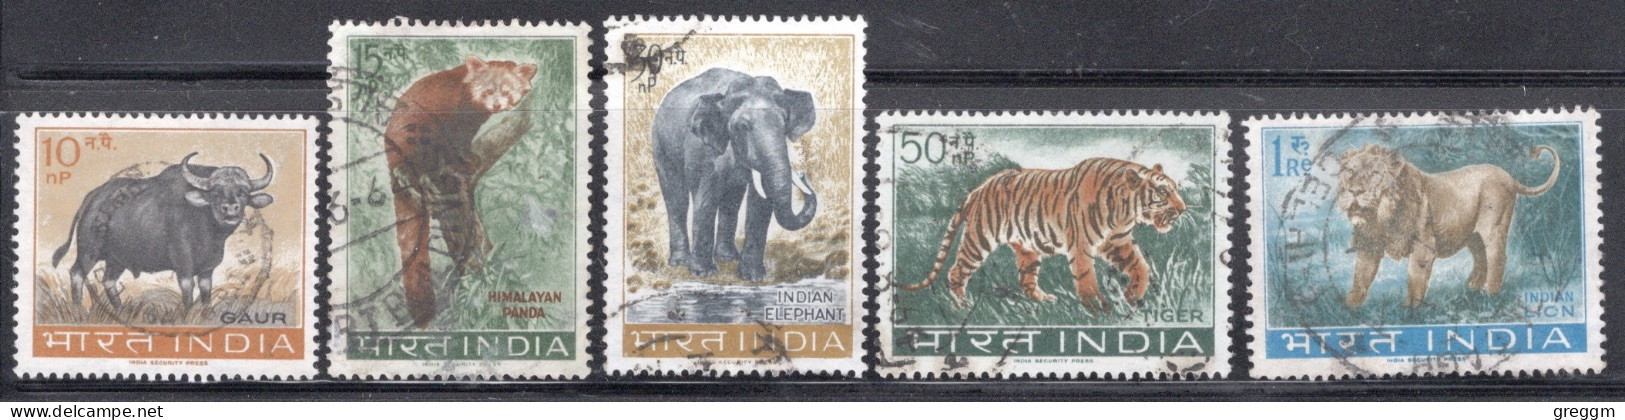 India 1963 Set Of Stamps To Celebrate Wildlife Conservation In Fine Used - Gebraucht